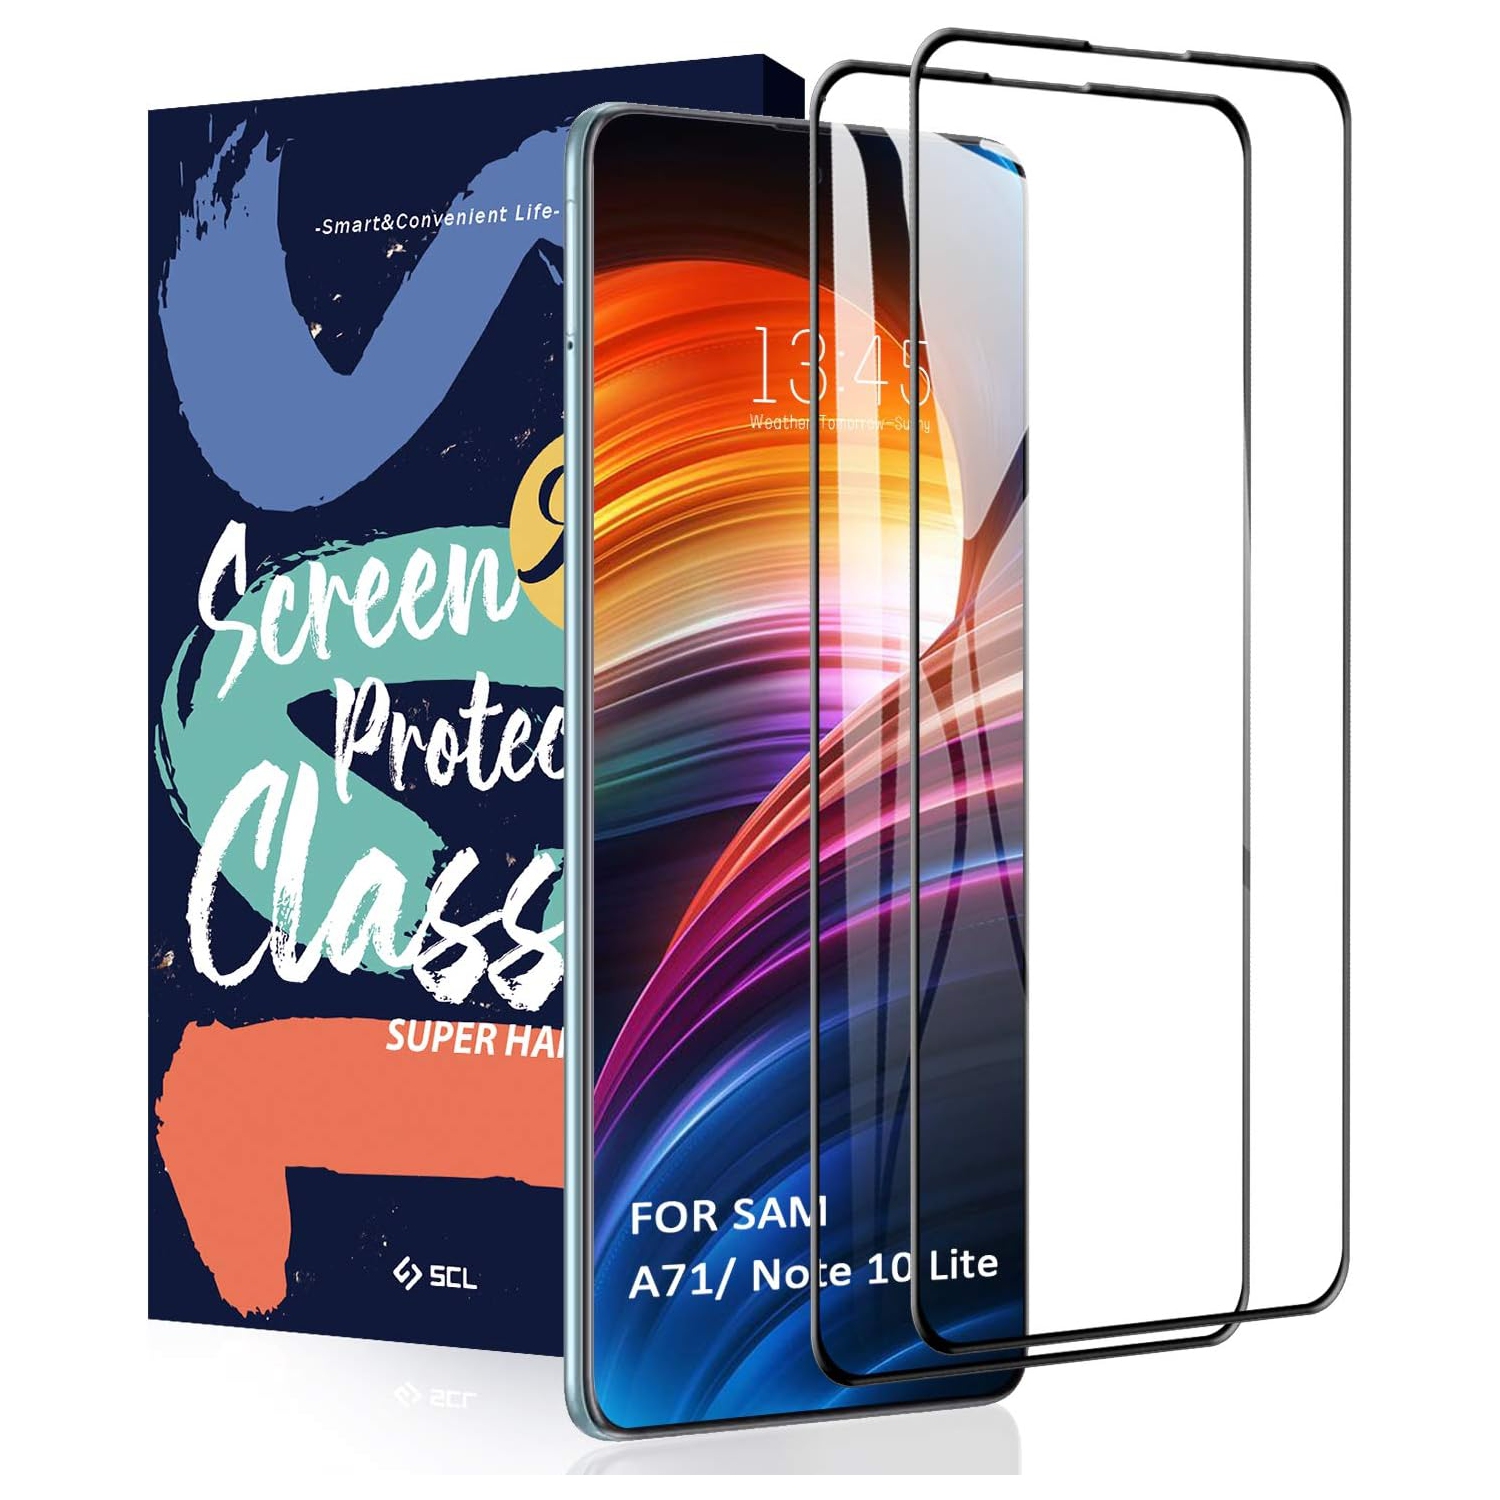 Screen Protector Compatible with Samsung Galaxy Note 10 Lite/A71,[2 Pack] 3D Curved Full Coverage Tempered